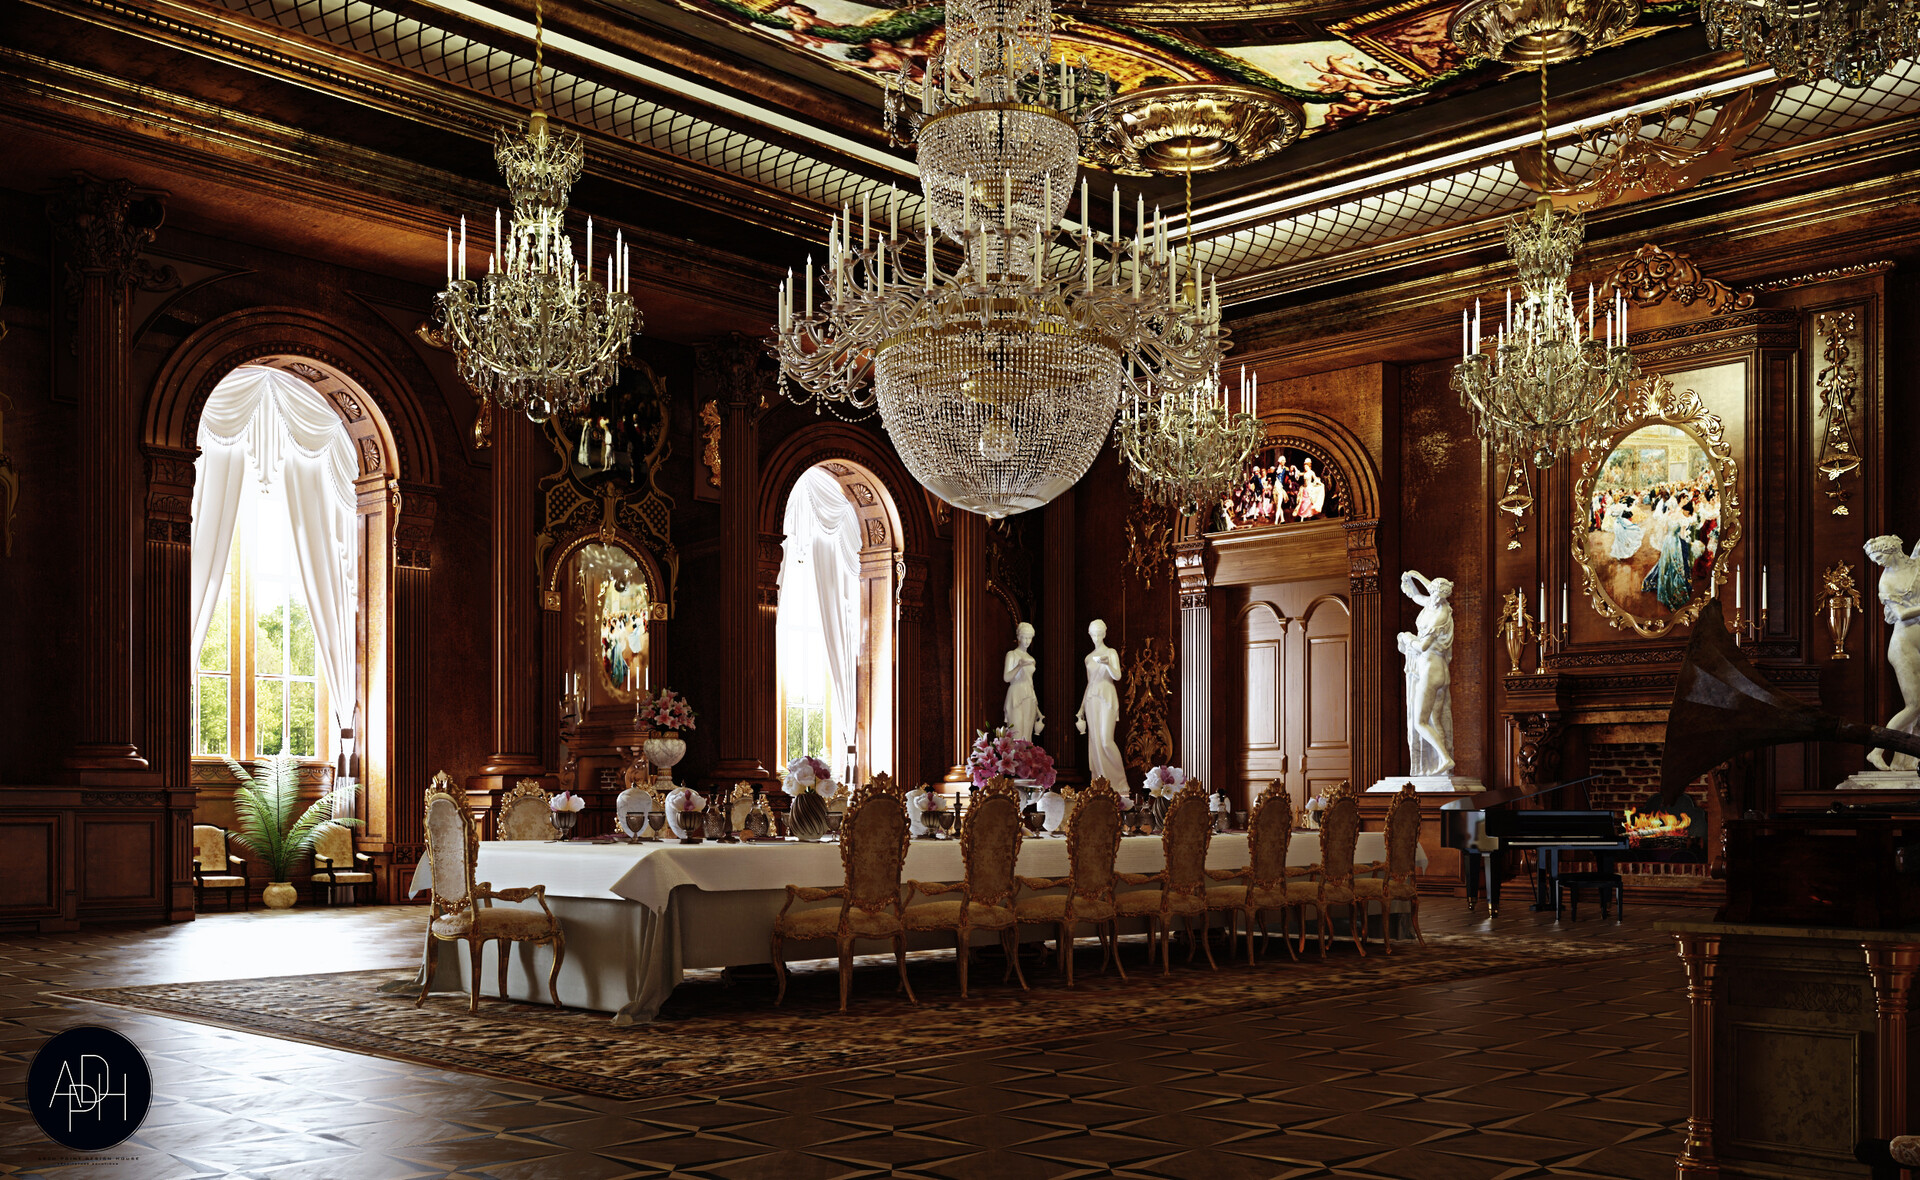 Dining Room In A Palace Is Called